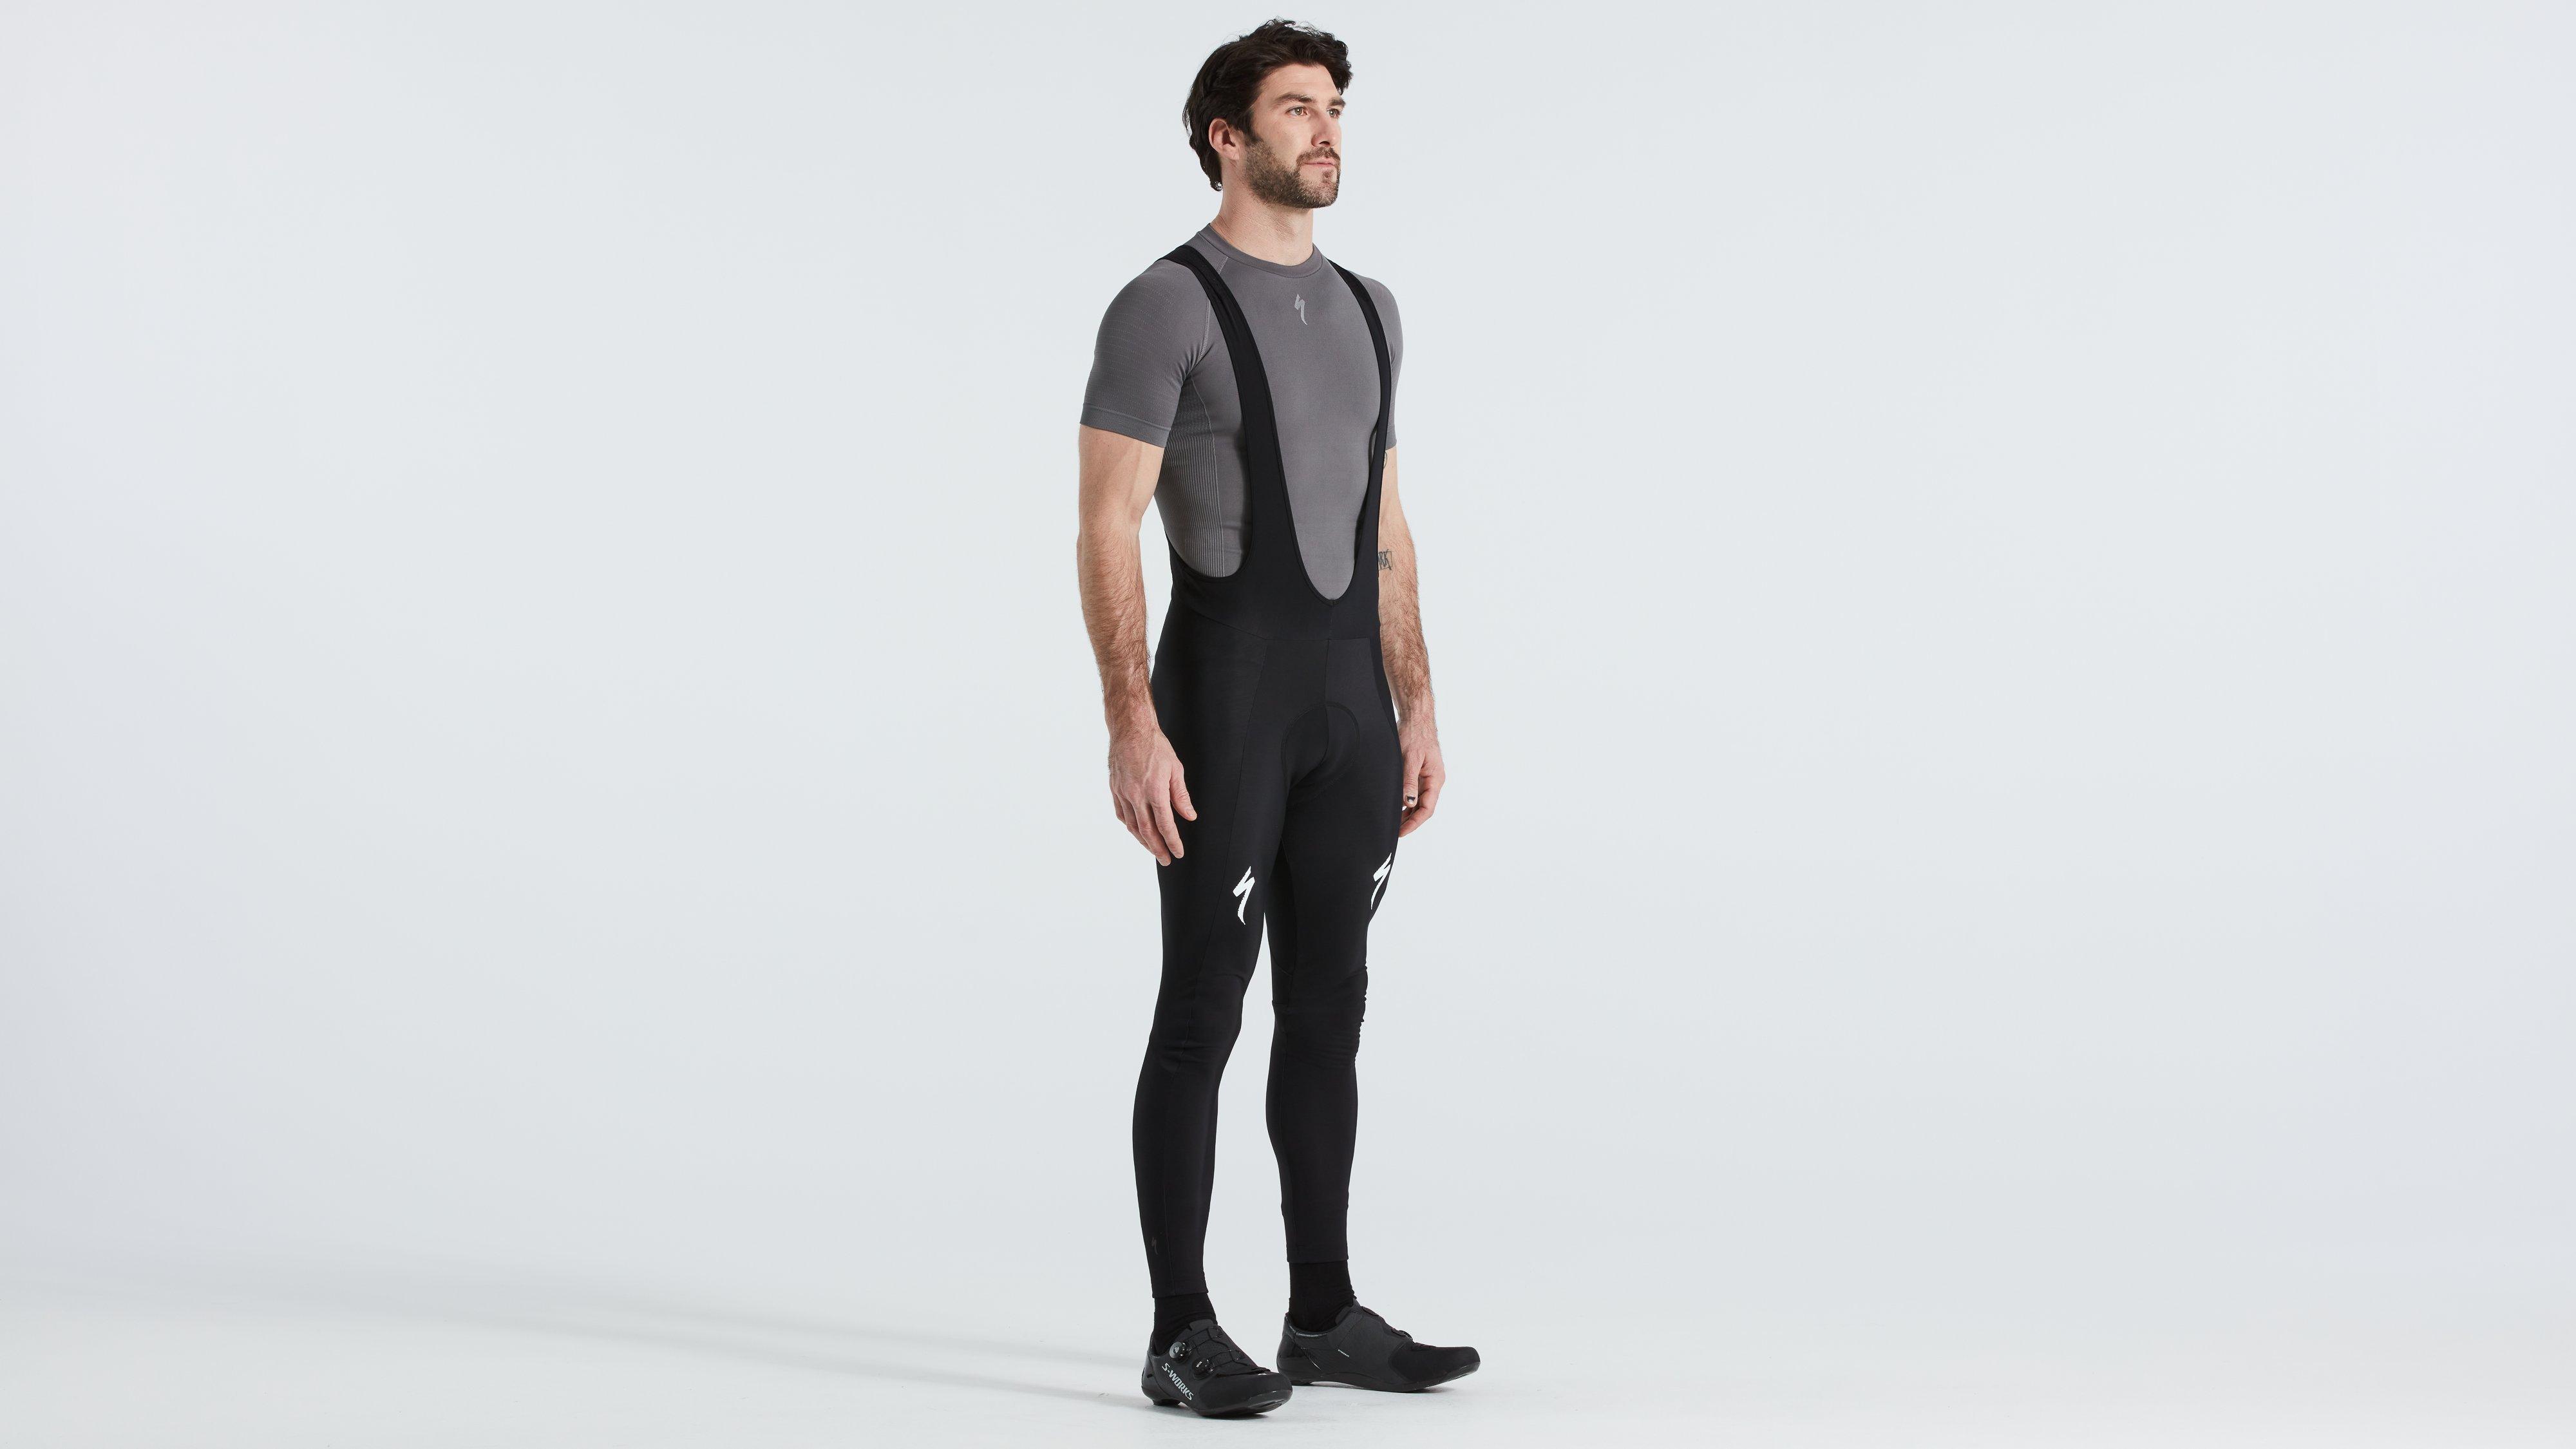 https://assets.specialized.com/i/specialized/64222-000_APP_RBX-COMP-LOGO-THERMAL-BIB-TIGHT-MEN-BLK-M_FRONT-3-4?$scom-pdp-product-image$&fmt=auto